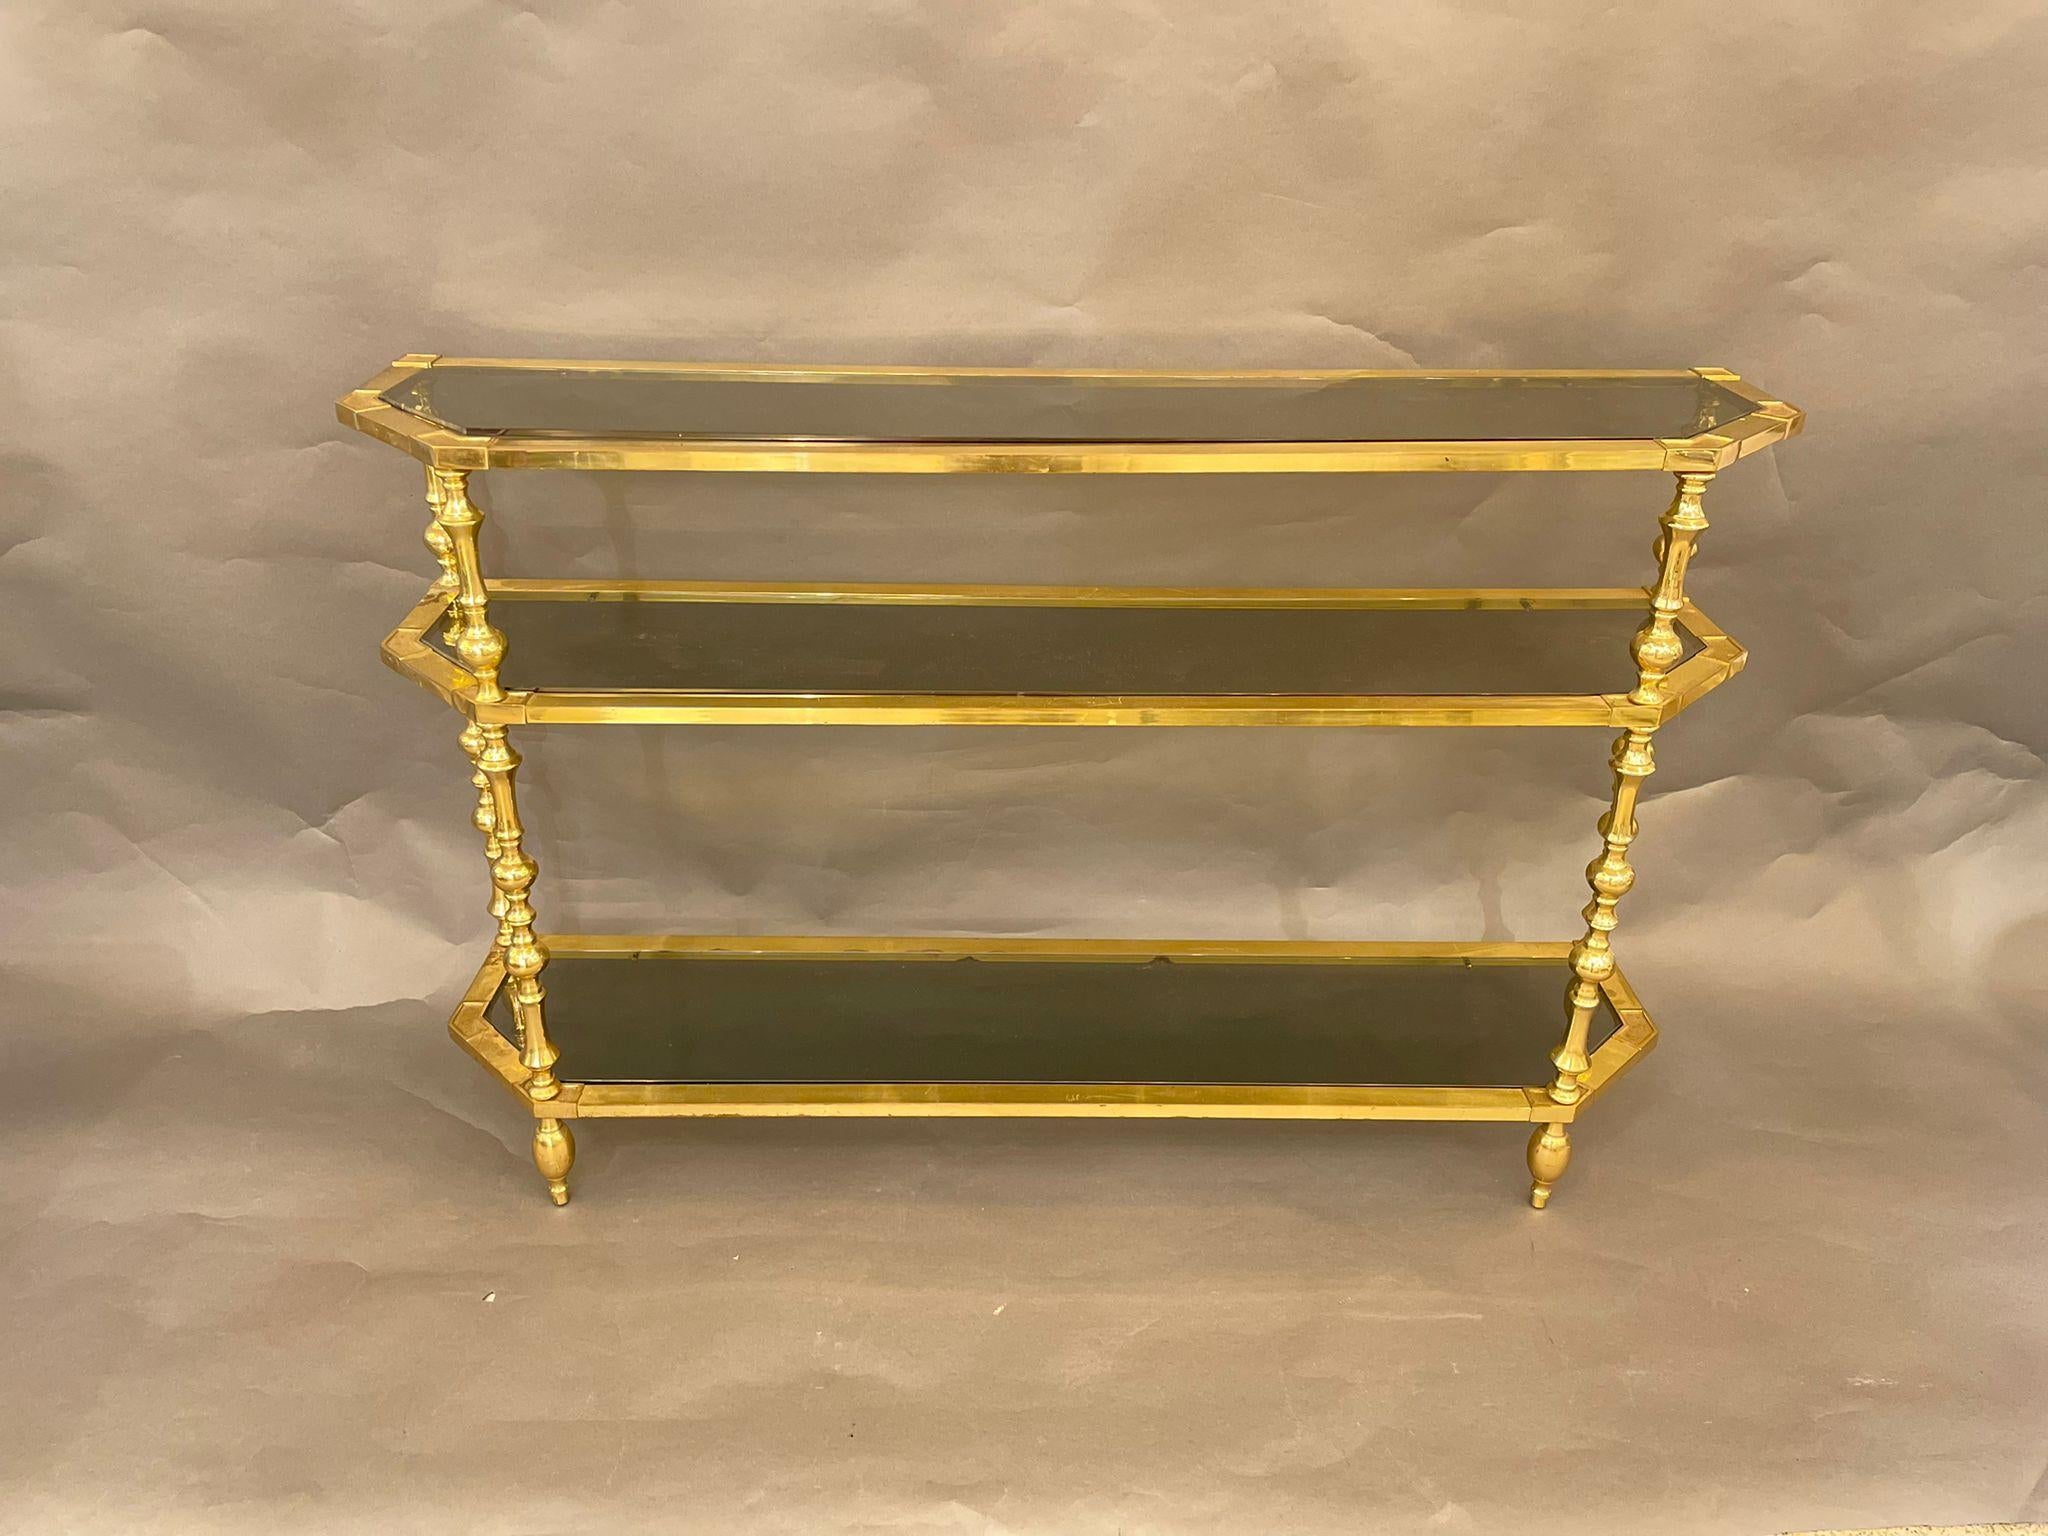 A vintage Italian tiered brass console/étagère from the mid-20th century, with smoked glass shelves. This stylish étagère features an elegant brass structure with three levels of smoked glass shelves.